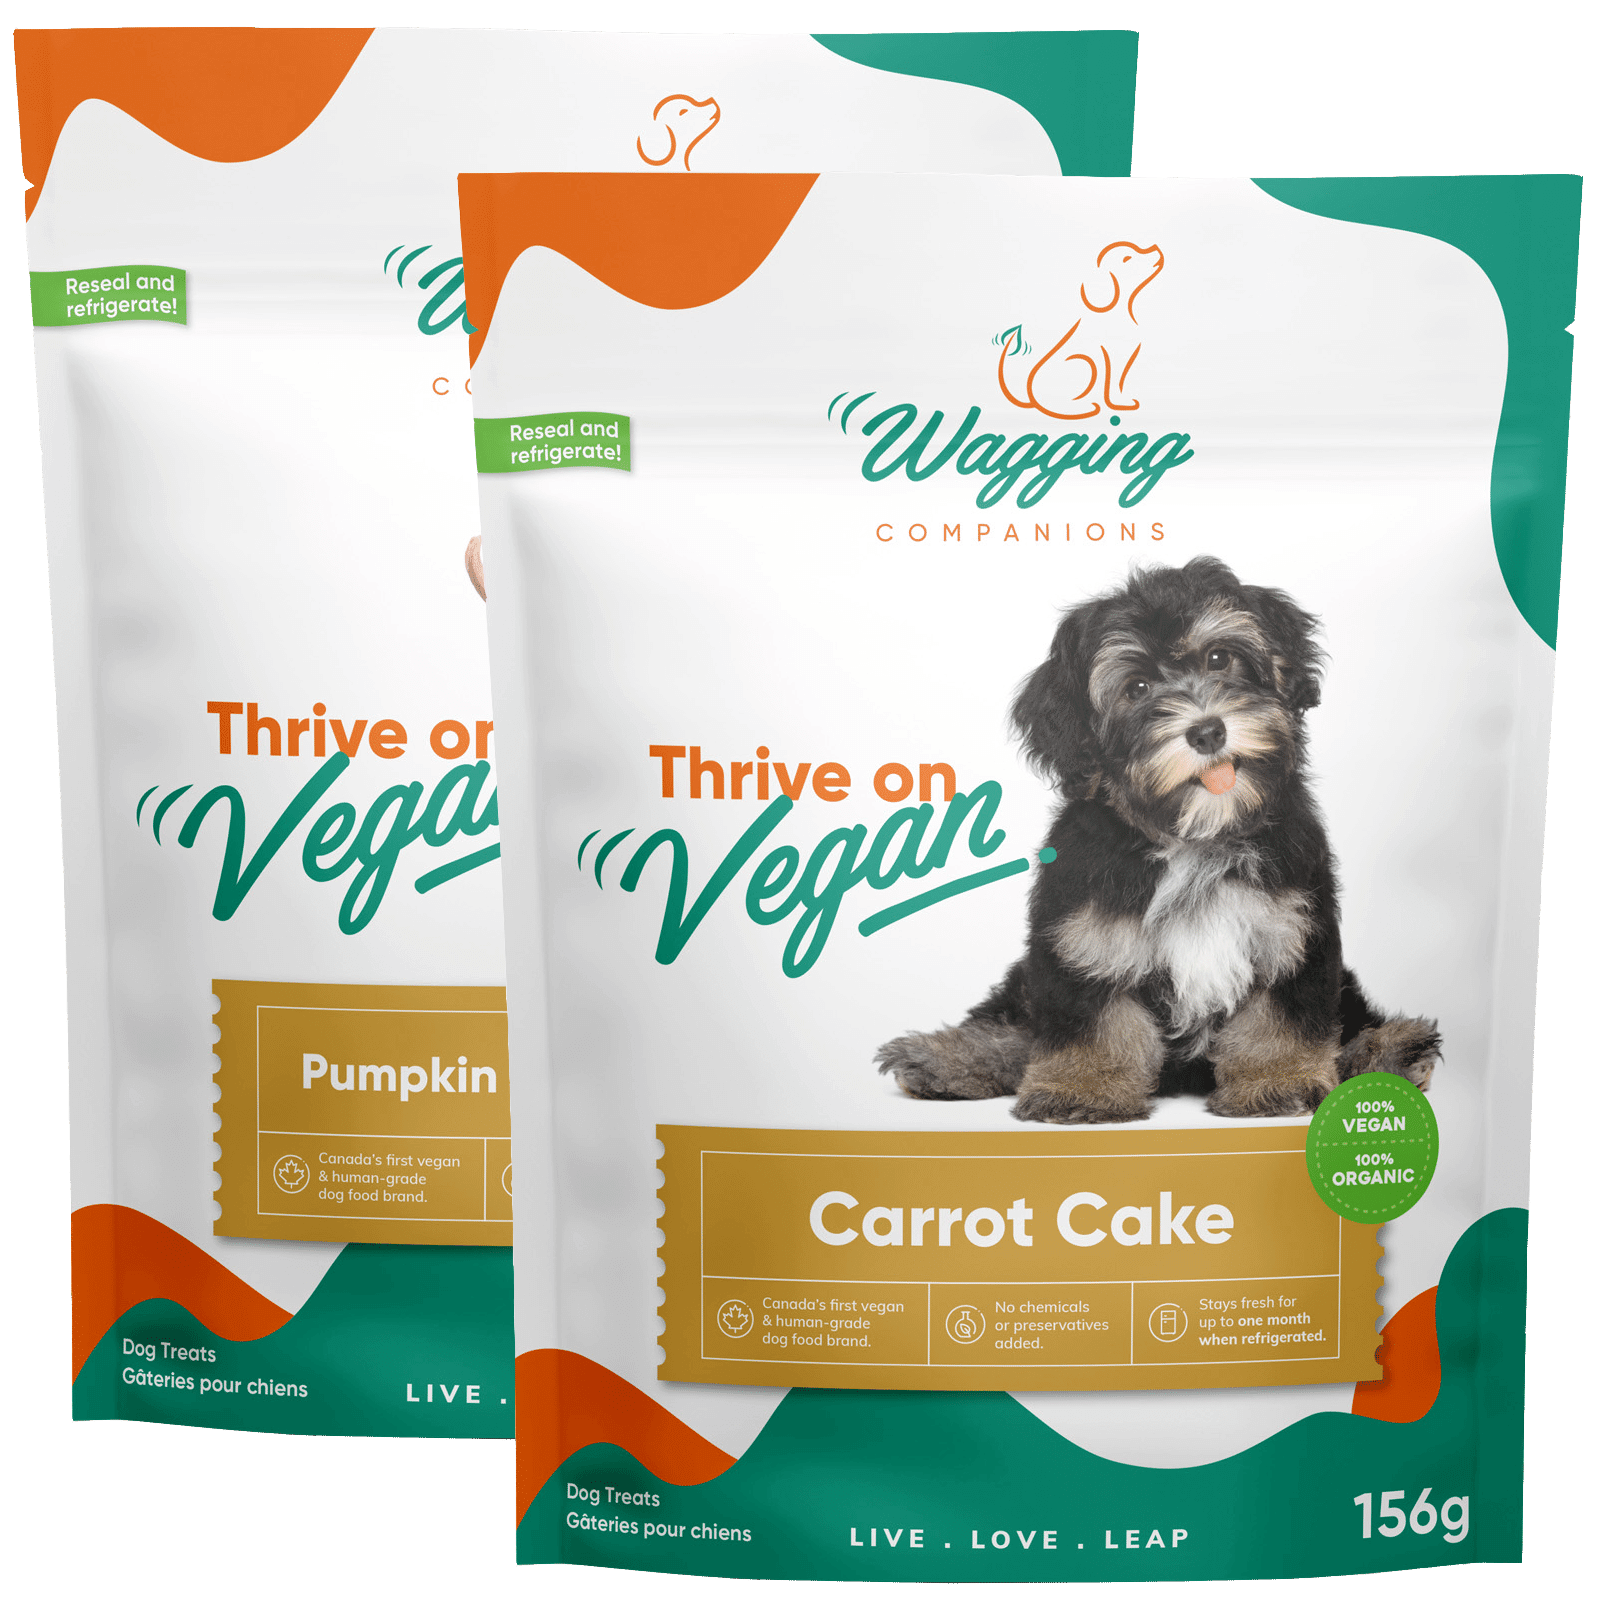 Front view of Wagging Companions' pumpkin spice oatmeal and carrot cake treats packaging. The simple yet visually appealing packaging prominently displays the message 'Thrive on Vegan.' The treats invite mixing-and-matching any 2 flavors, offering a cost-saving option for pet owners seeking quality vegan treats.